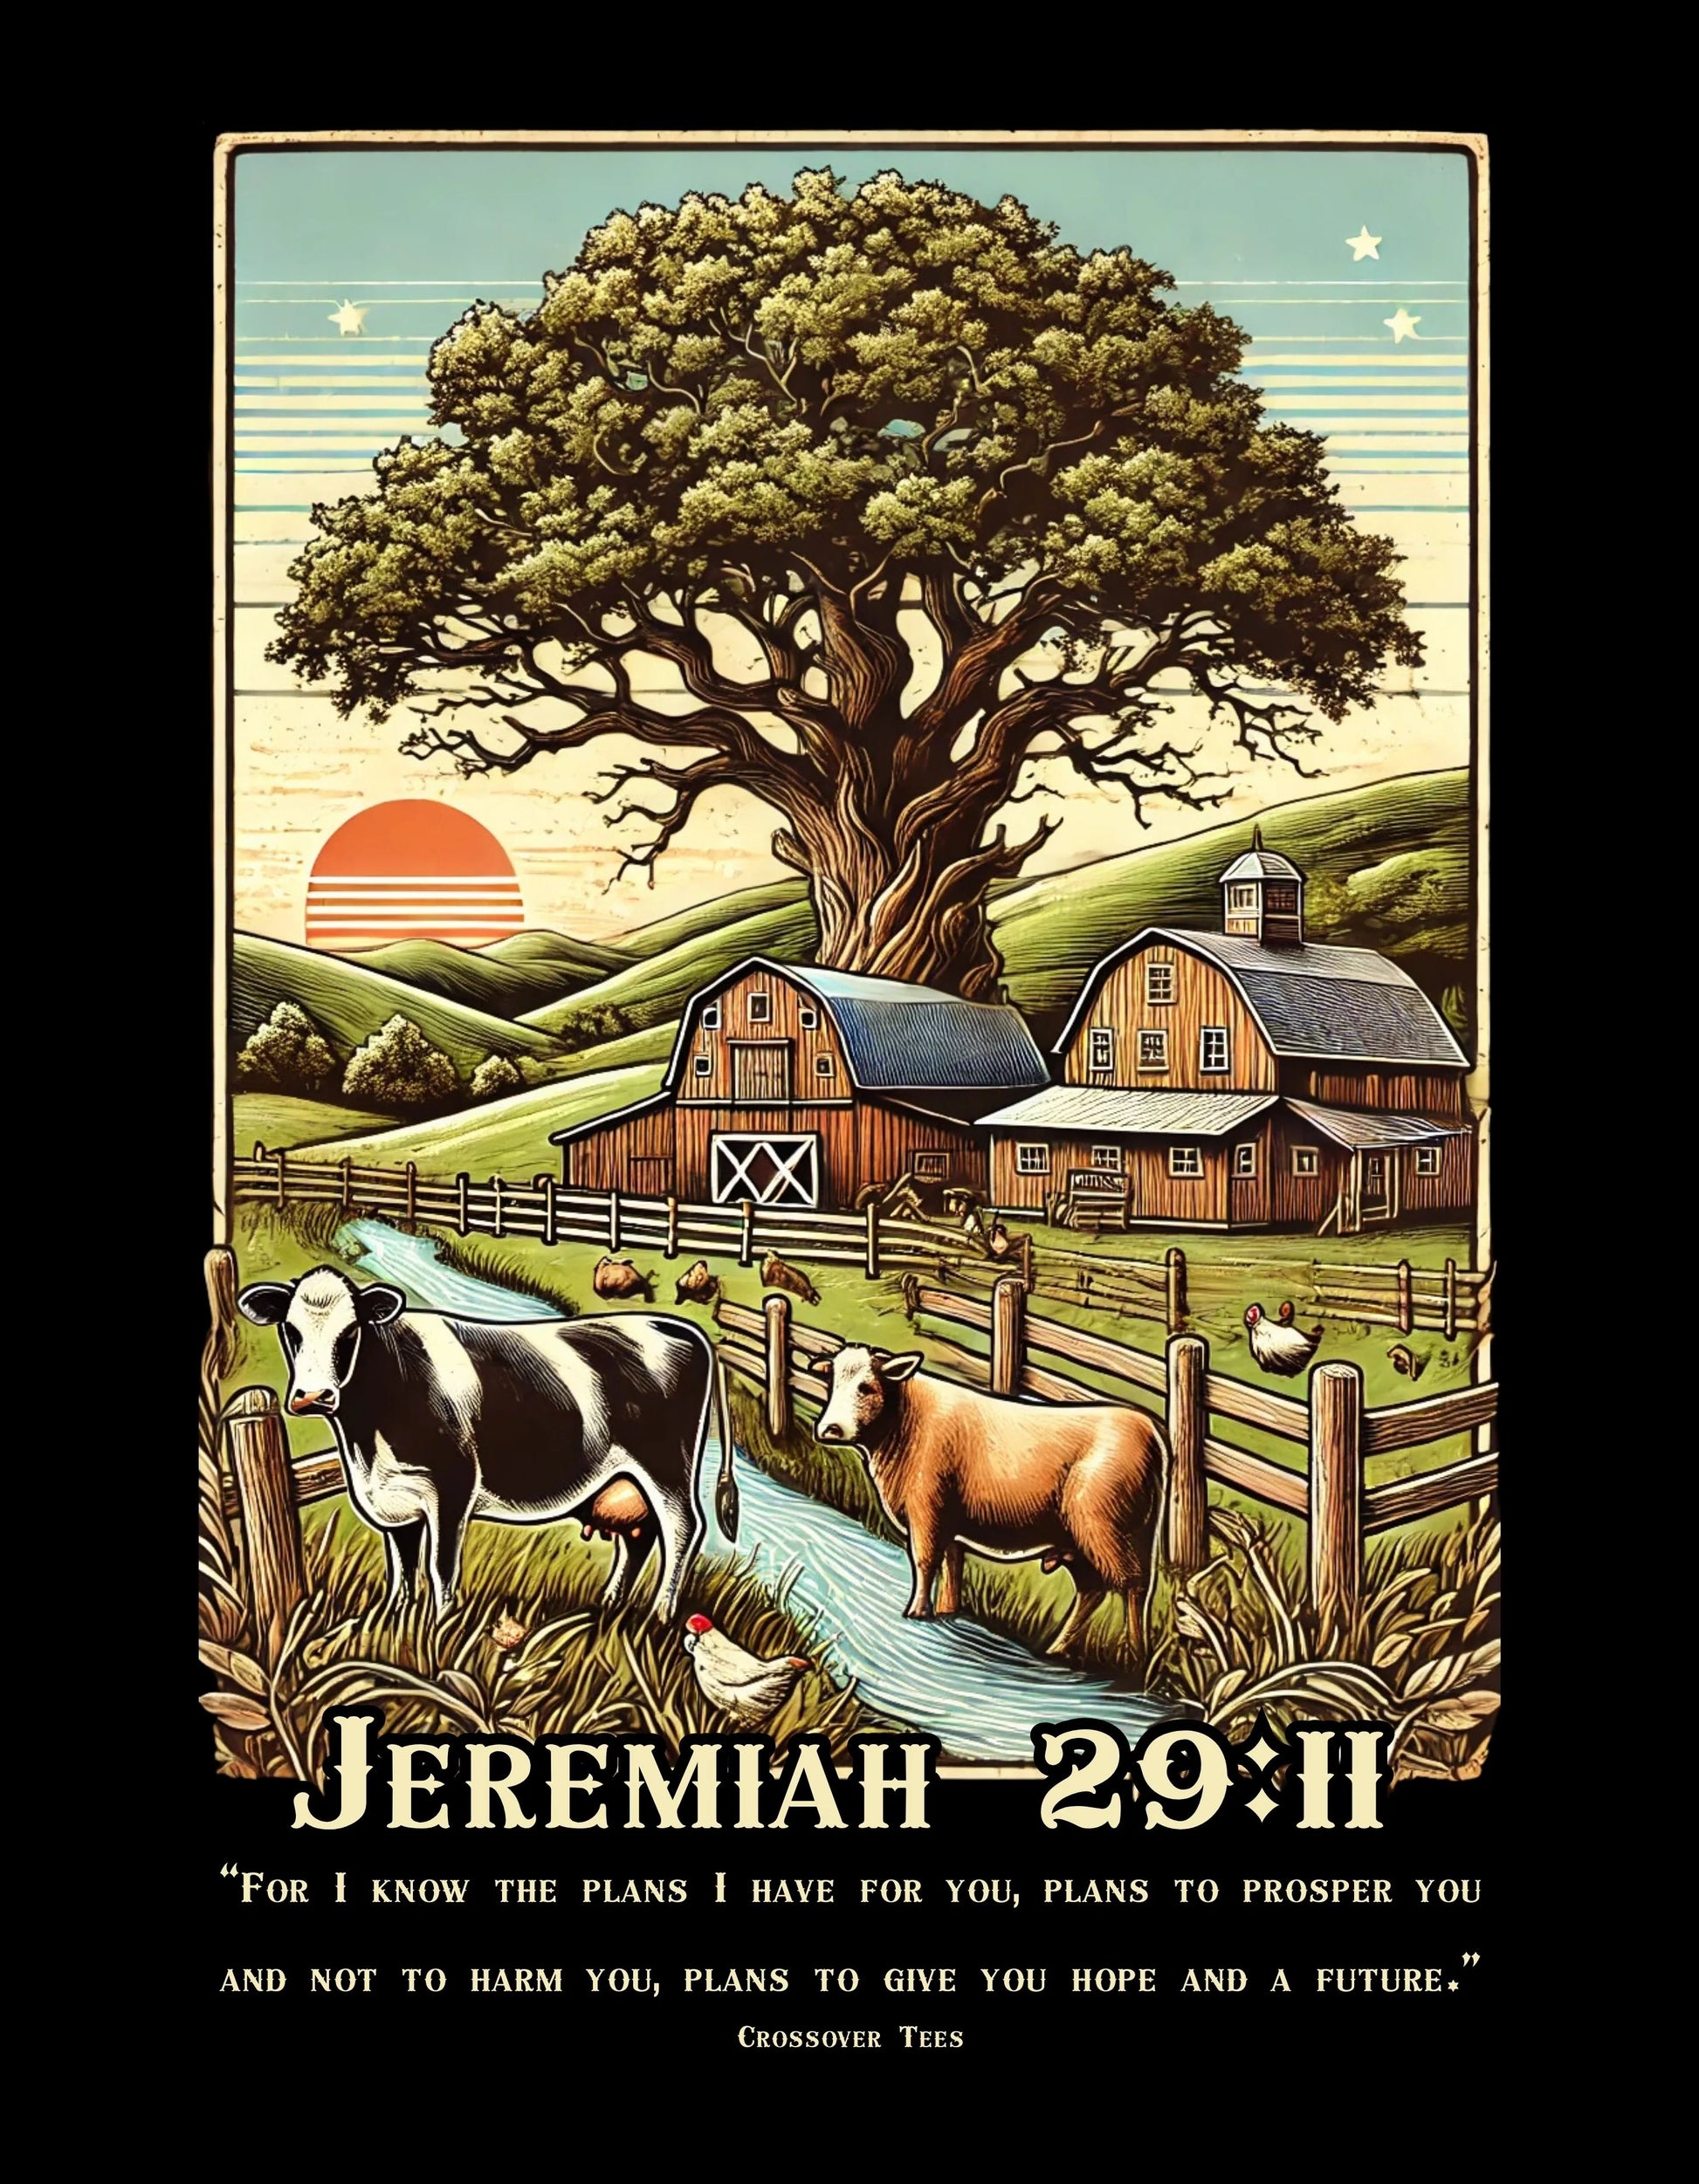 Crossover Tees Jeremiah 29:11 T-Shirt Crossover Tees© Apparel Mens New Short Sleeve T-shirts Women's